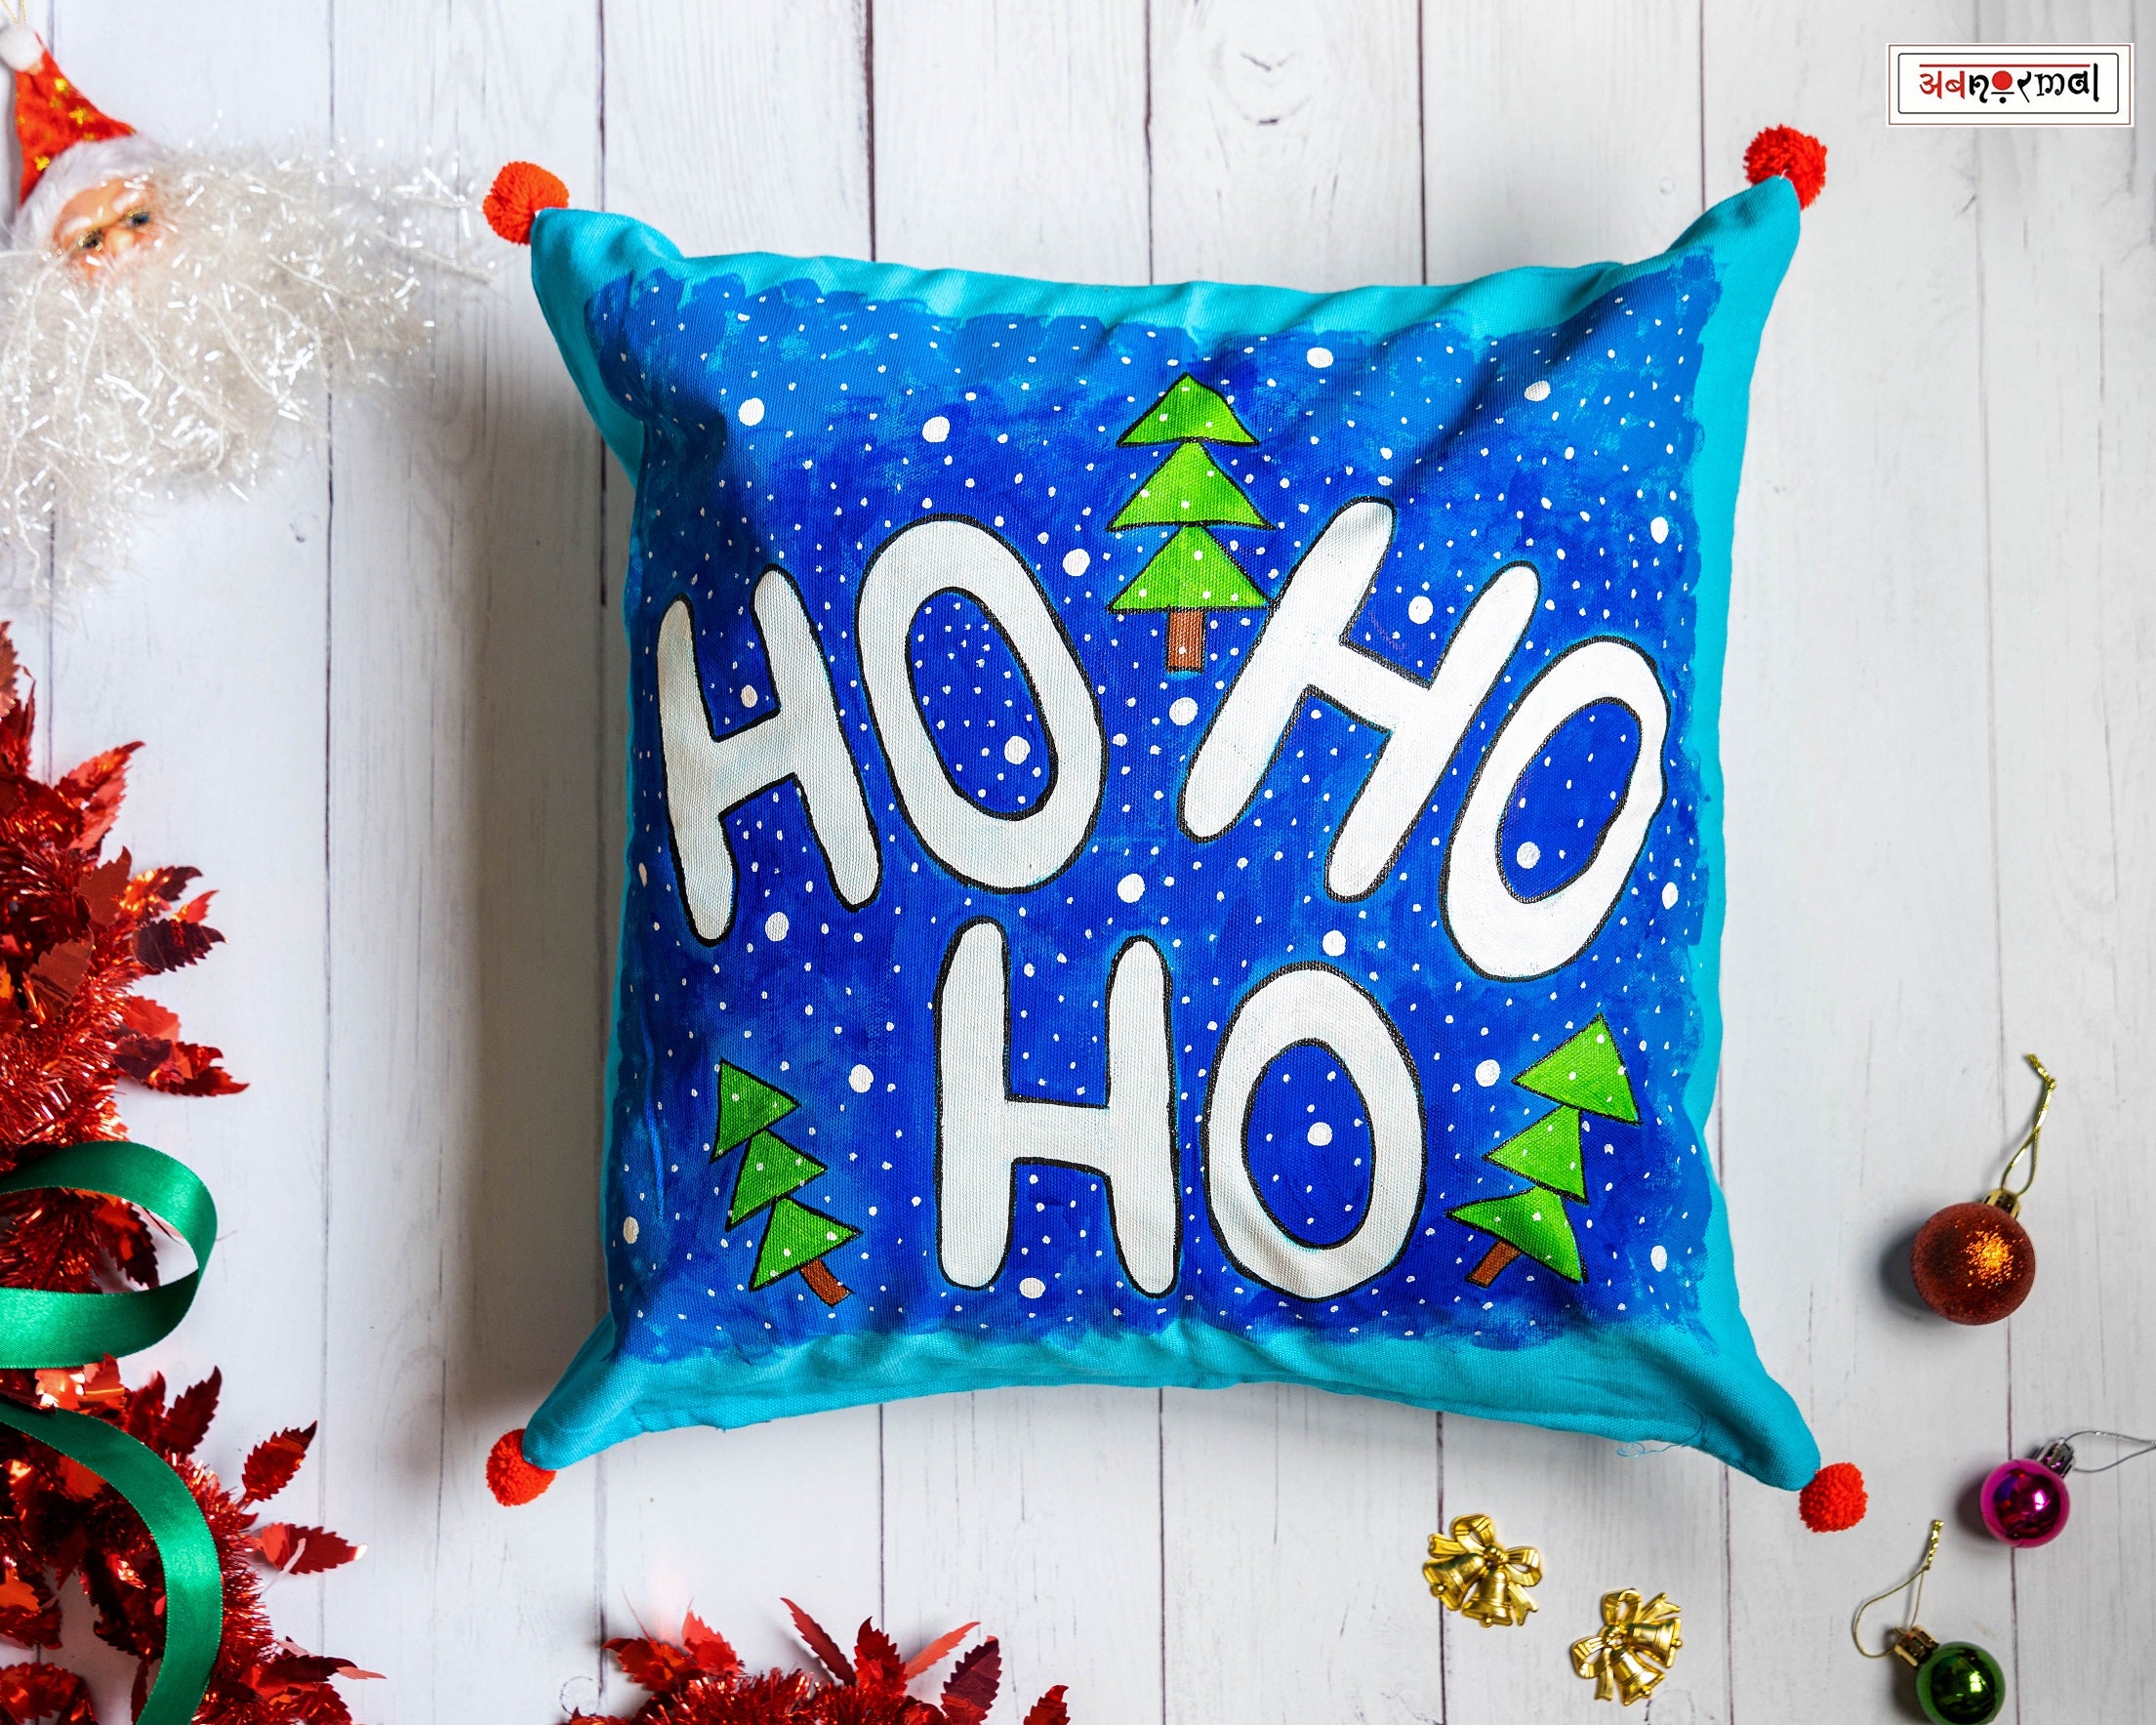 TIS THE SEASON TO BE JOLLY CUSHION COVER (SOLD AS A SINGLE PIECE)